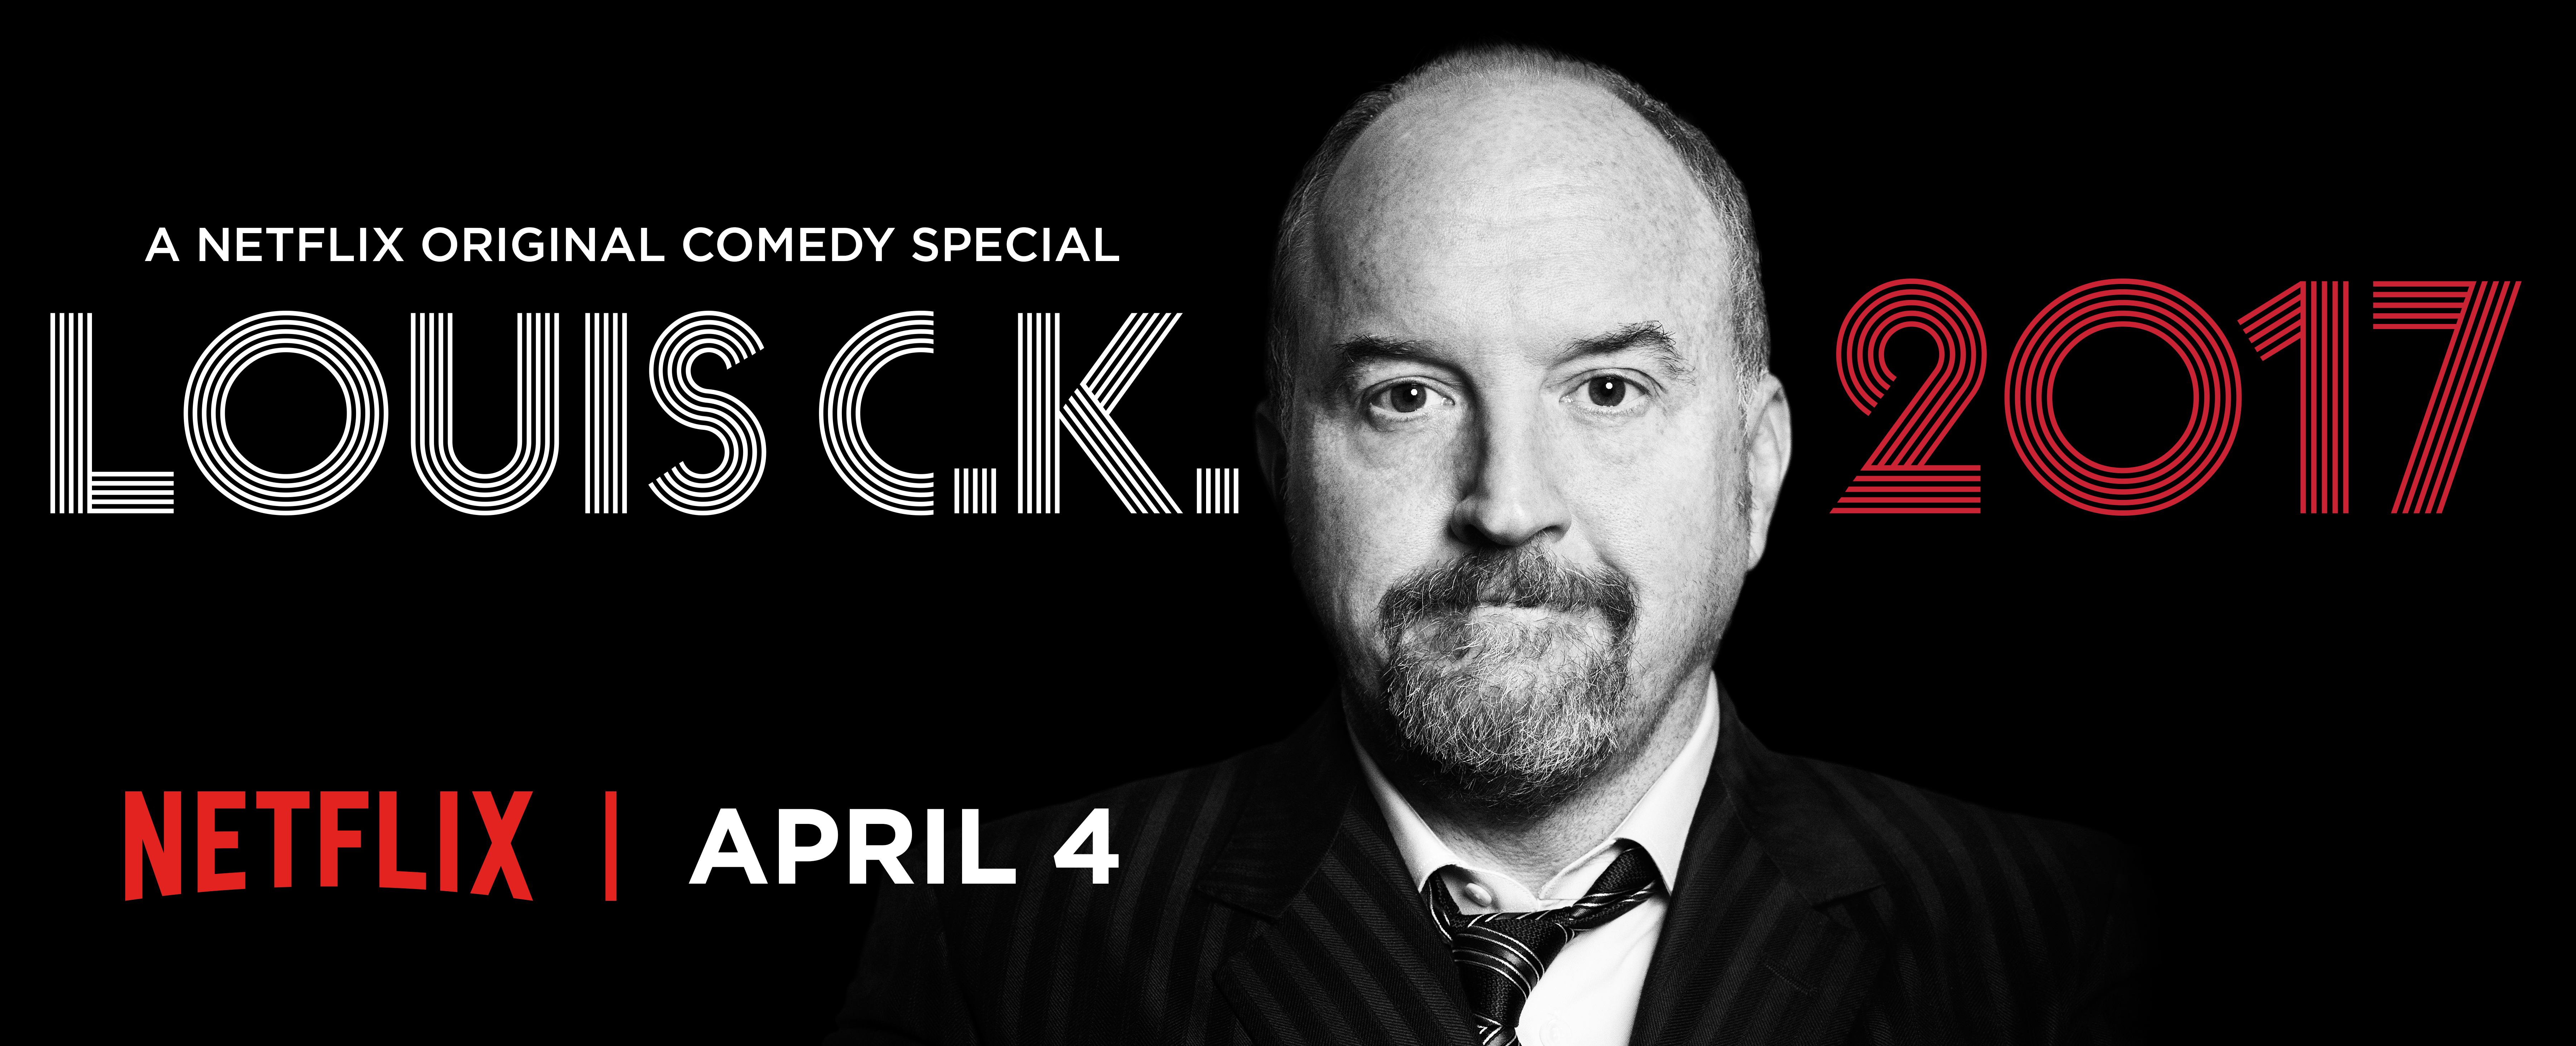 Louis C.K. Suits Up in First Trailer for His New Netflix Special 2017 - Paste